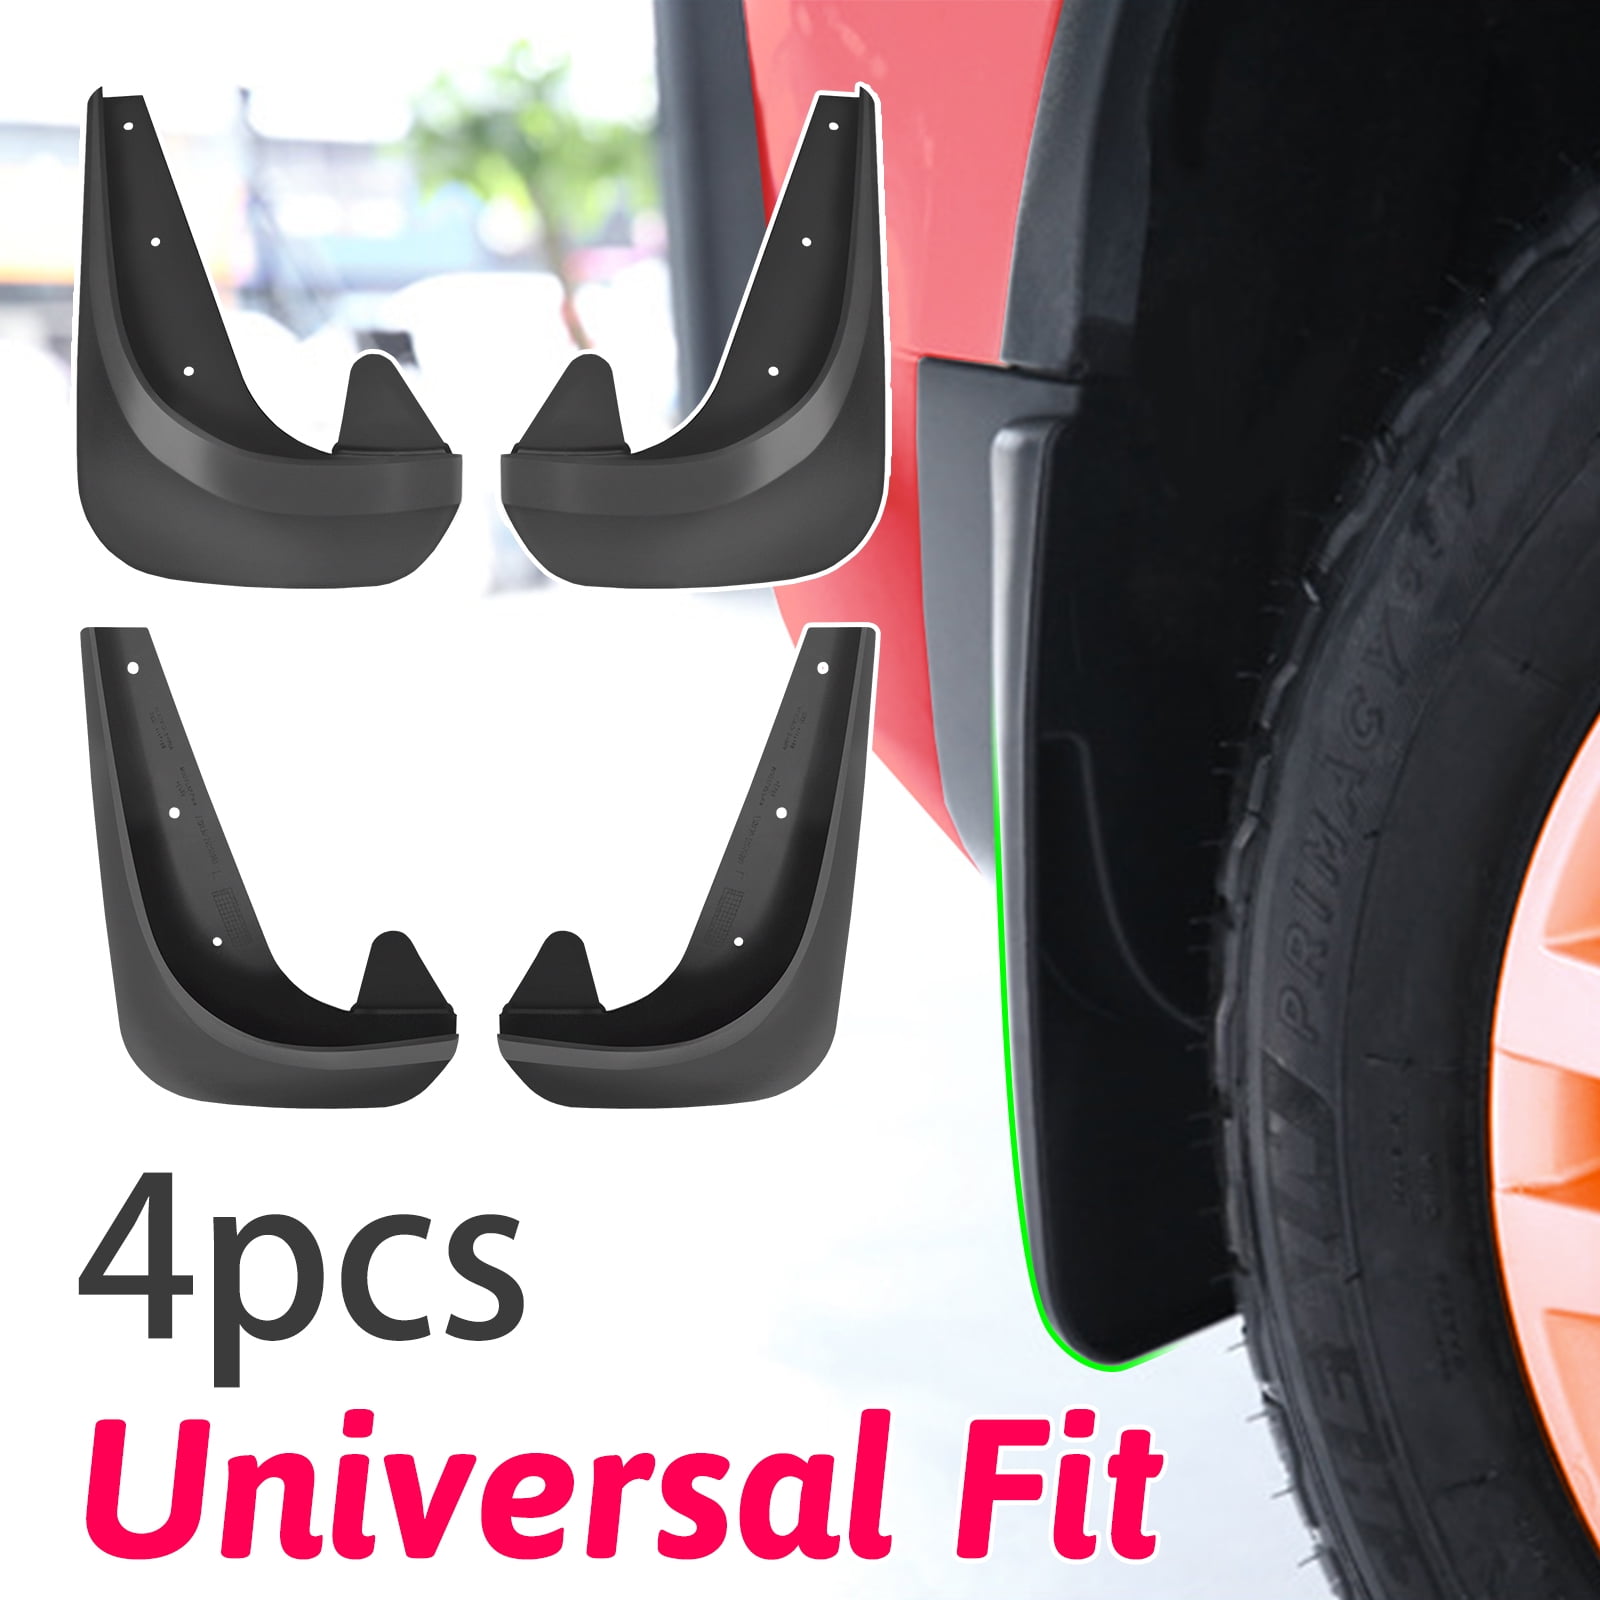  4PCS Mud Flaps for Car Front & Rear Wheel,Universal Splash  Guard Automotive Exterior Accessories Fits for Car SUV RV Truck,Car  Essentials Mud Guards with Installation Tools : Automotive